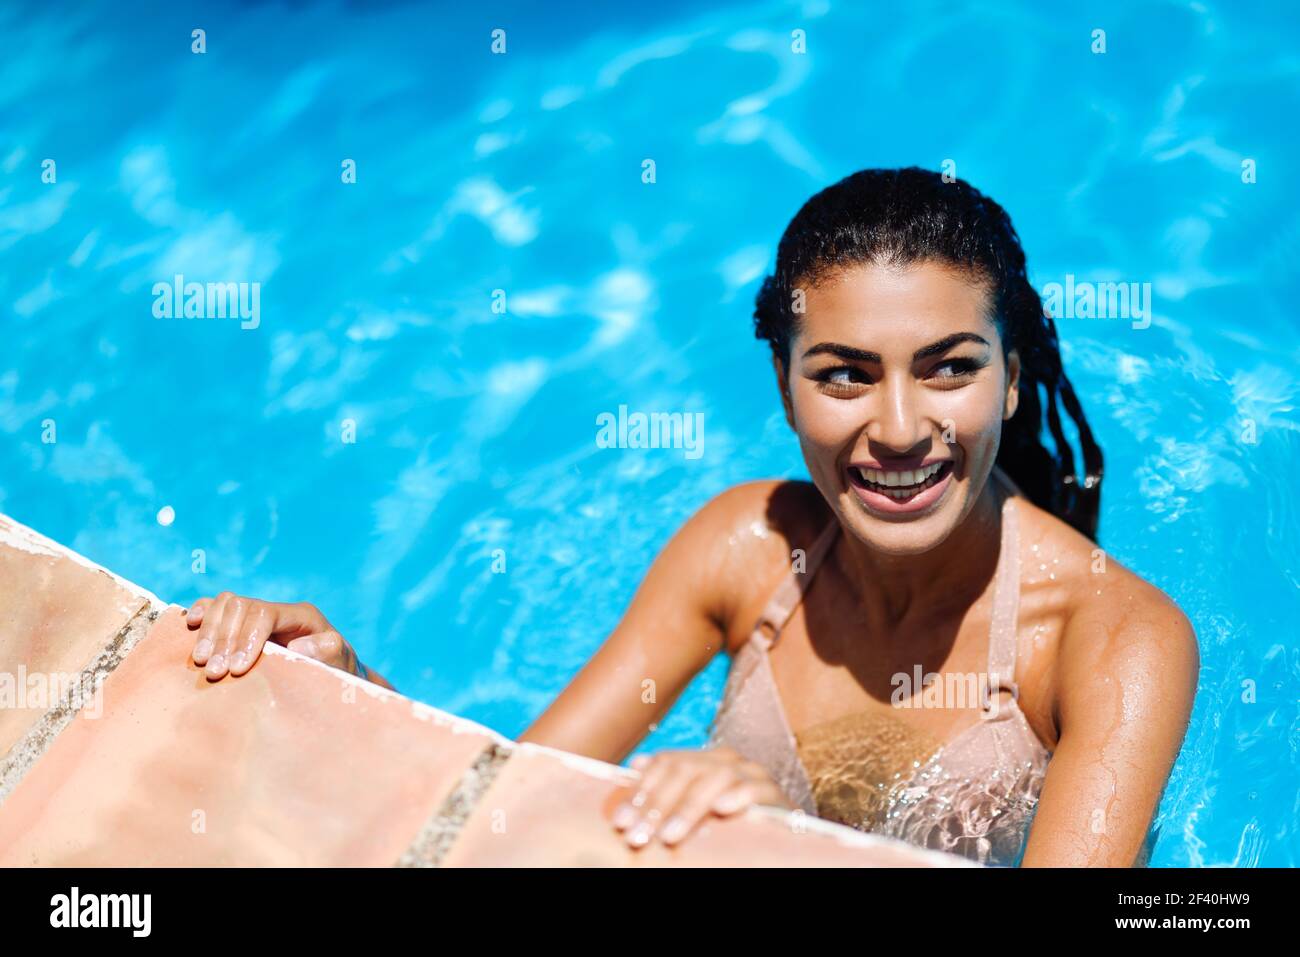 Happy Young Woman Relaxing In Swimming Pool Smiling Girl With Healthy Tanned Skin And Wet Hair